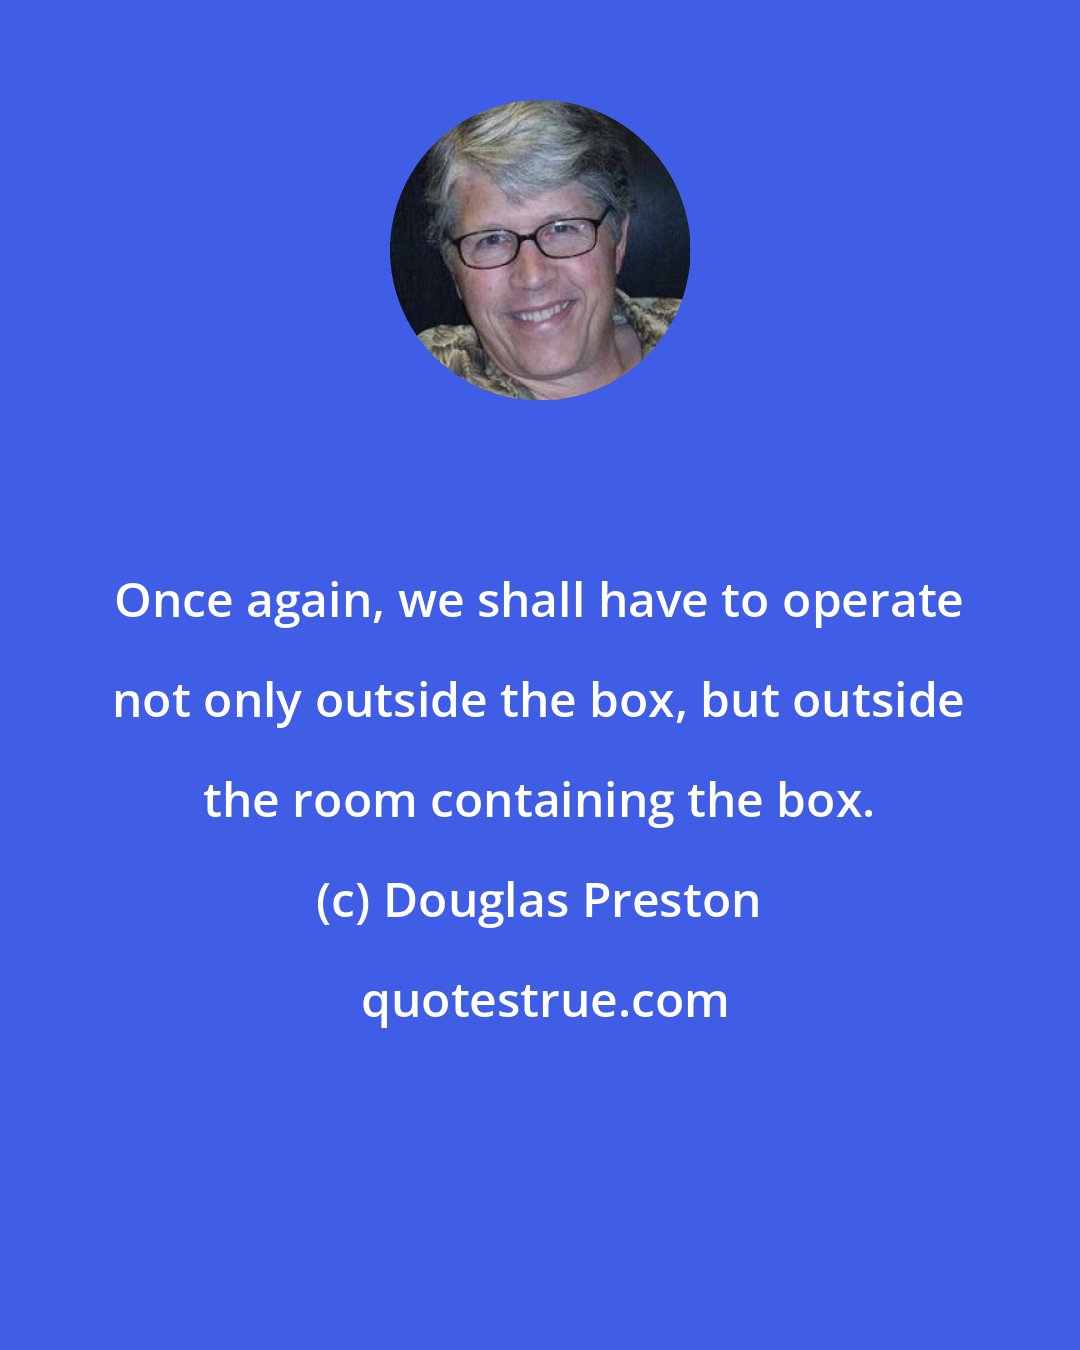 Douglas Preston: Once again, we shall have to operate not only outside the box, but outside the room containing the box.